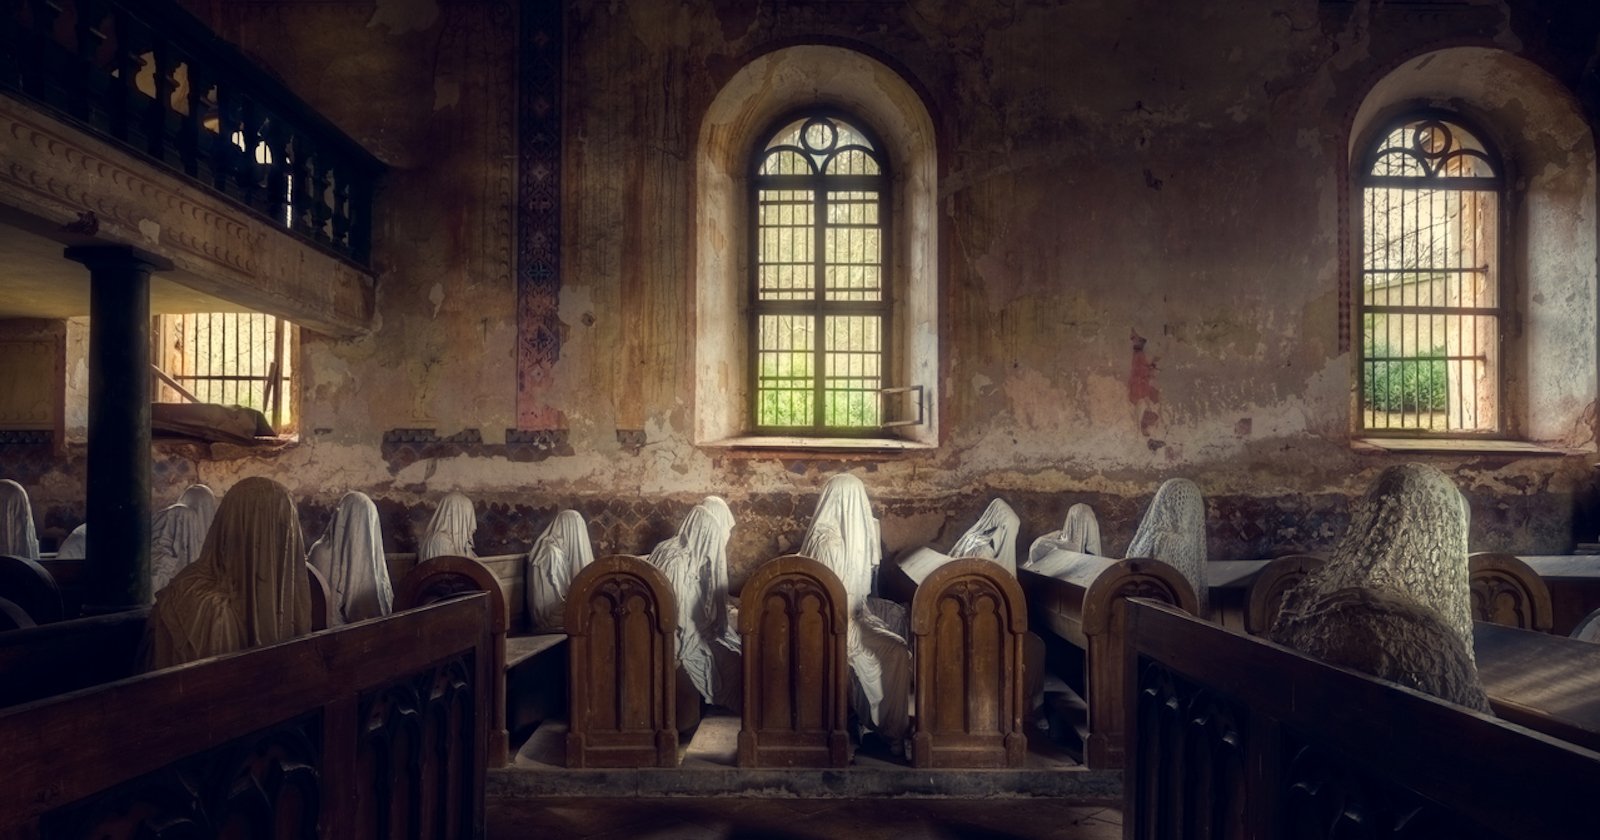 Photographing the Famous Abandoned Church Full of 'Ghosts' | PetaPixel